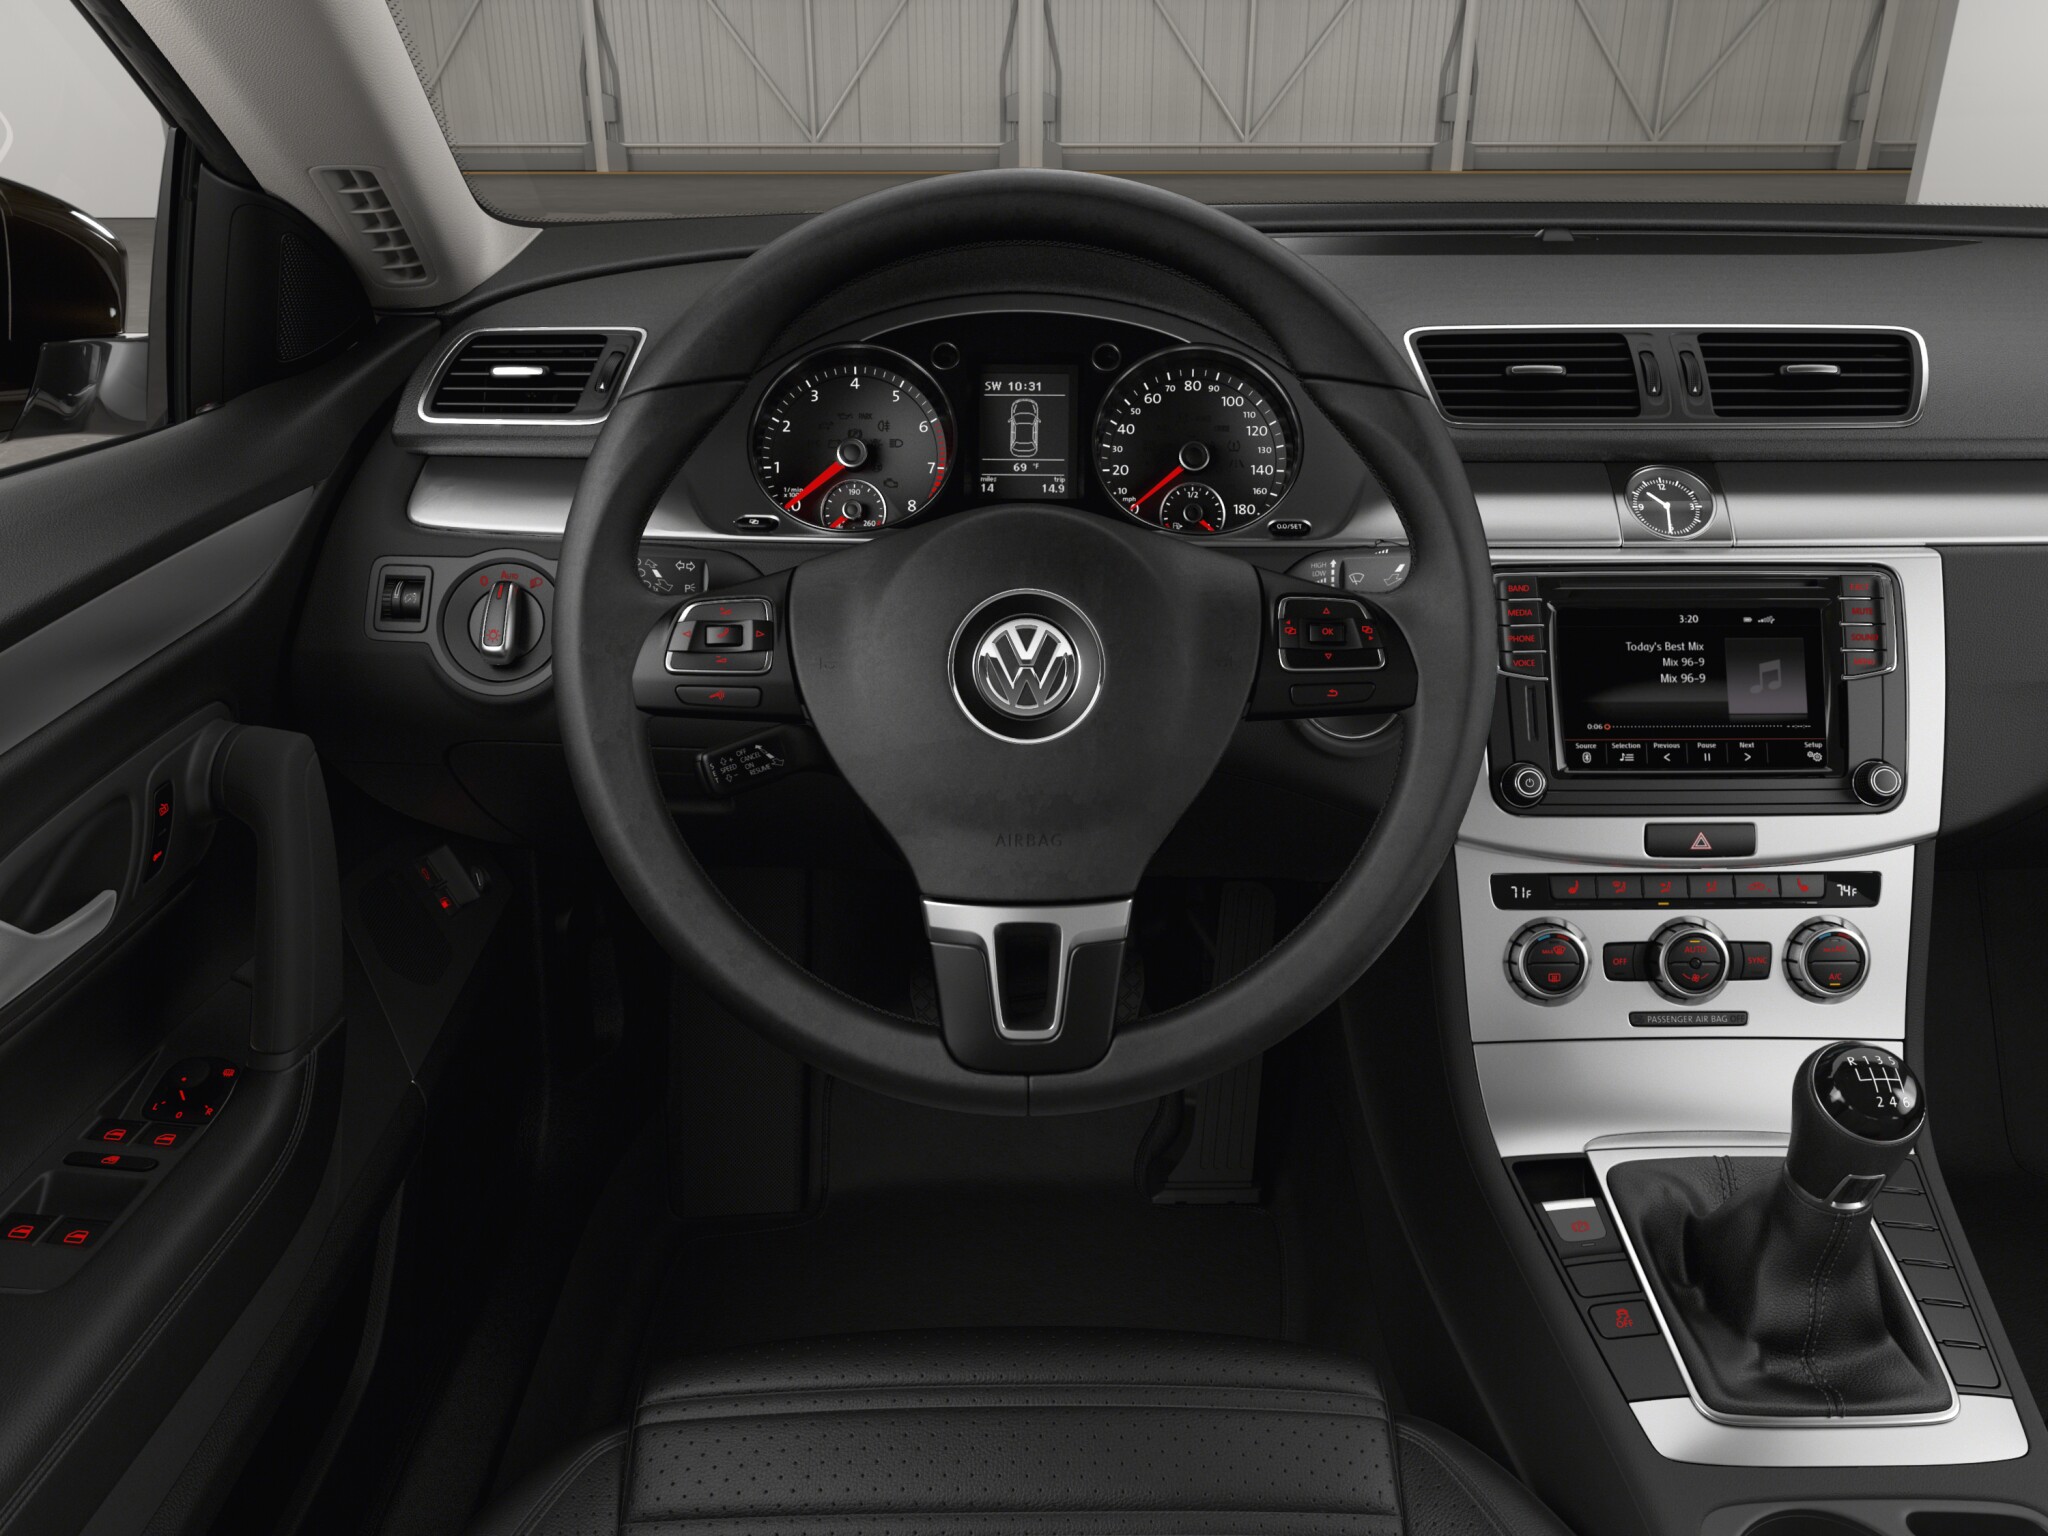 Volkswagen CC V6 Executive 4MOTION interior front view